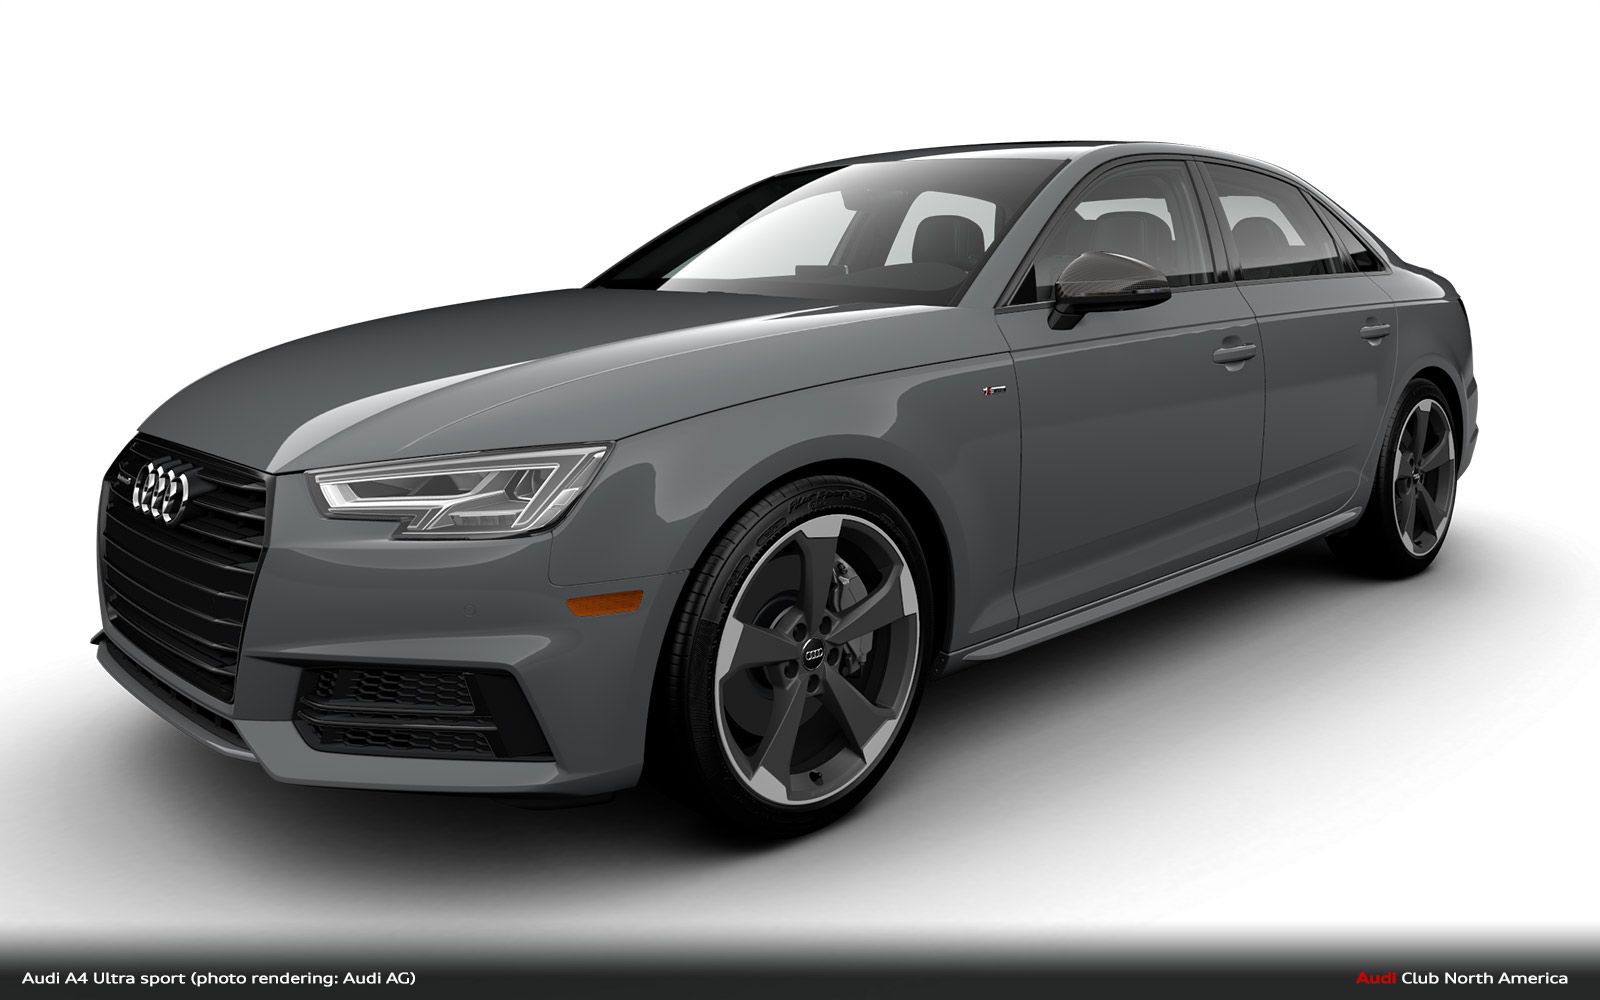 The Audi A4 Ultrasport to Return as a Very Limited Last Stand for the Manual Transmission